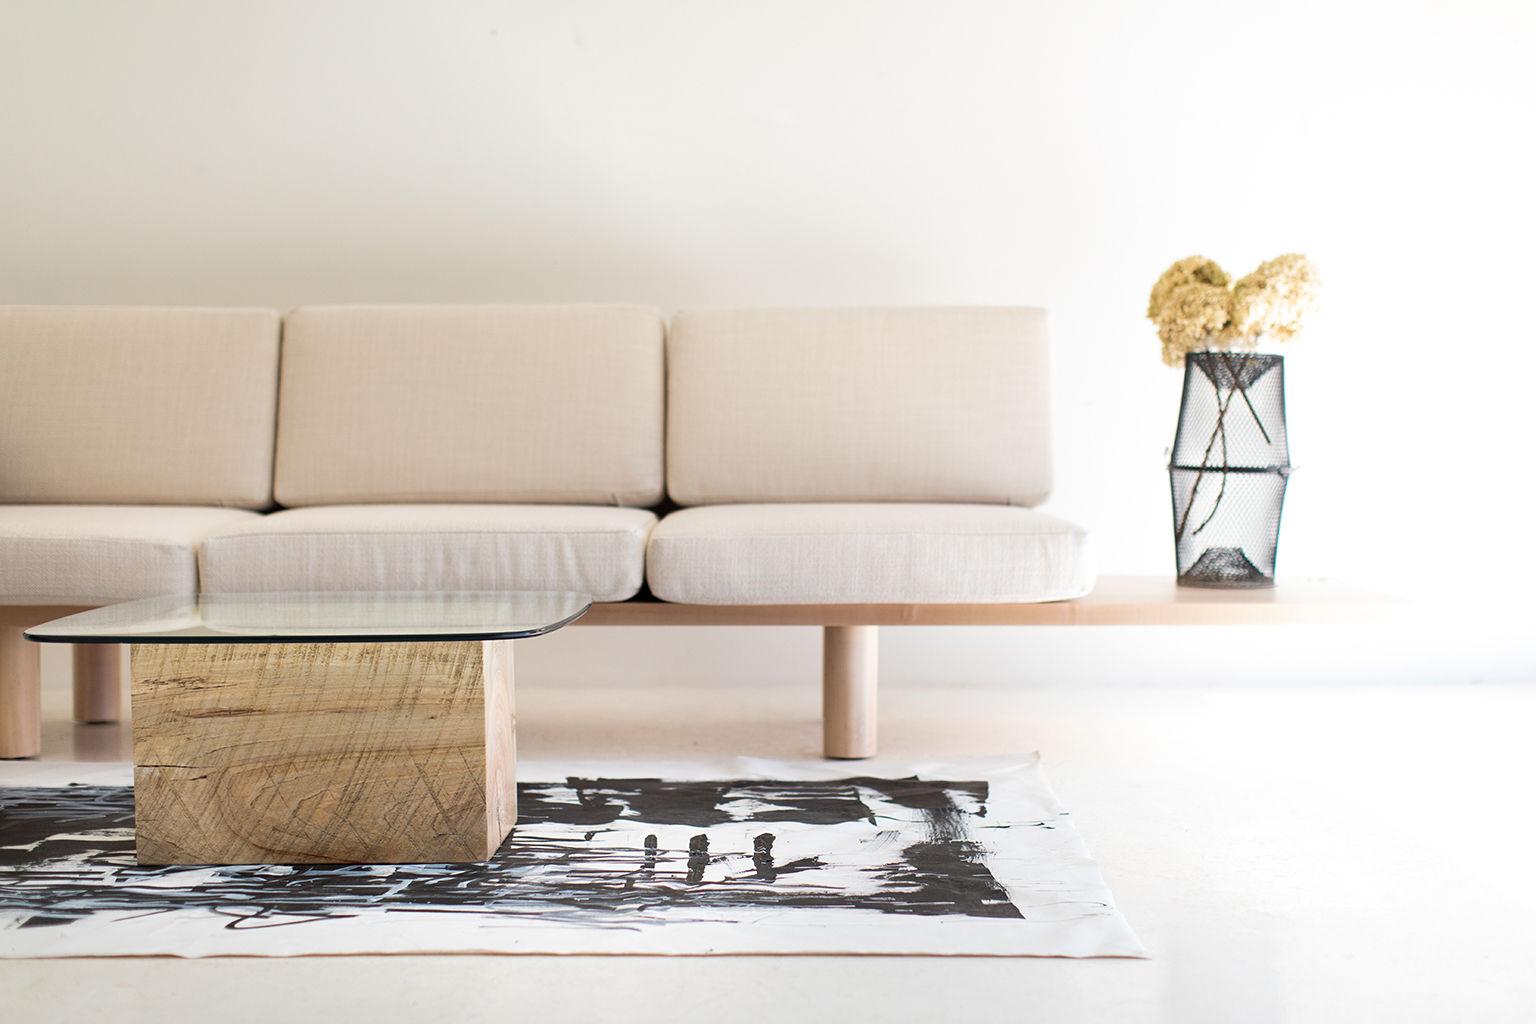 This Modern Suelo sofa - Turned Leg is beautifully constructed from solid wood in Ohio, USA. The sofa's silhouette is simple, modern, and sleek with comfortable reversible back and seat cushions. This is the perfect sofa for any space, indoor or